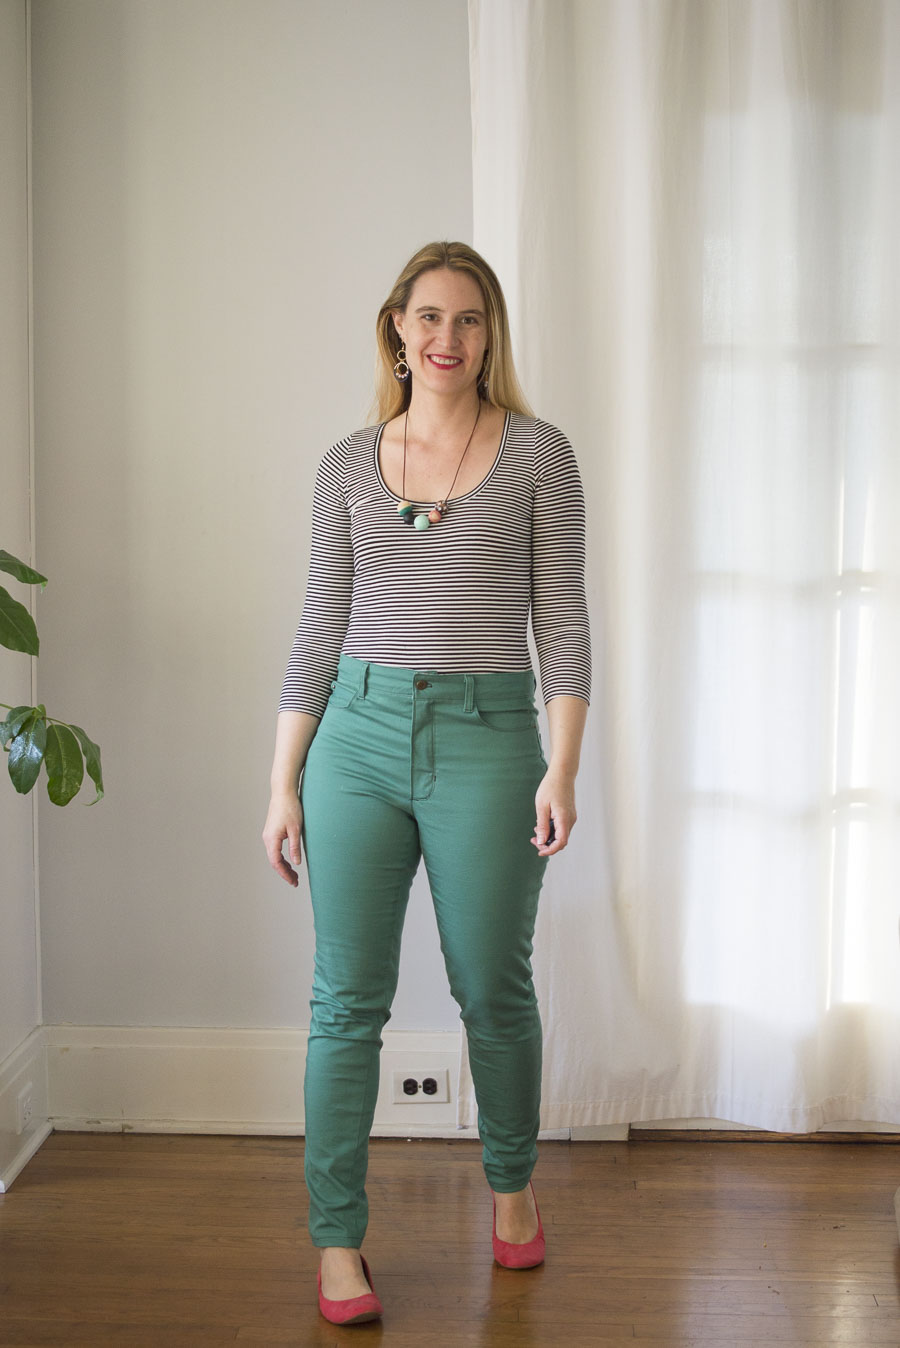 Nettie Bodysuit and Ginger Jeans : IndieSew Blogger Team - A HAPPY STITCH